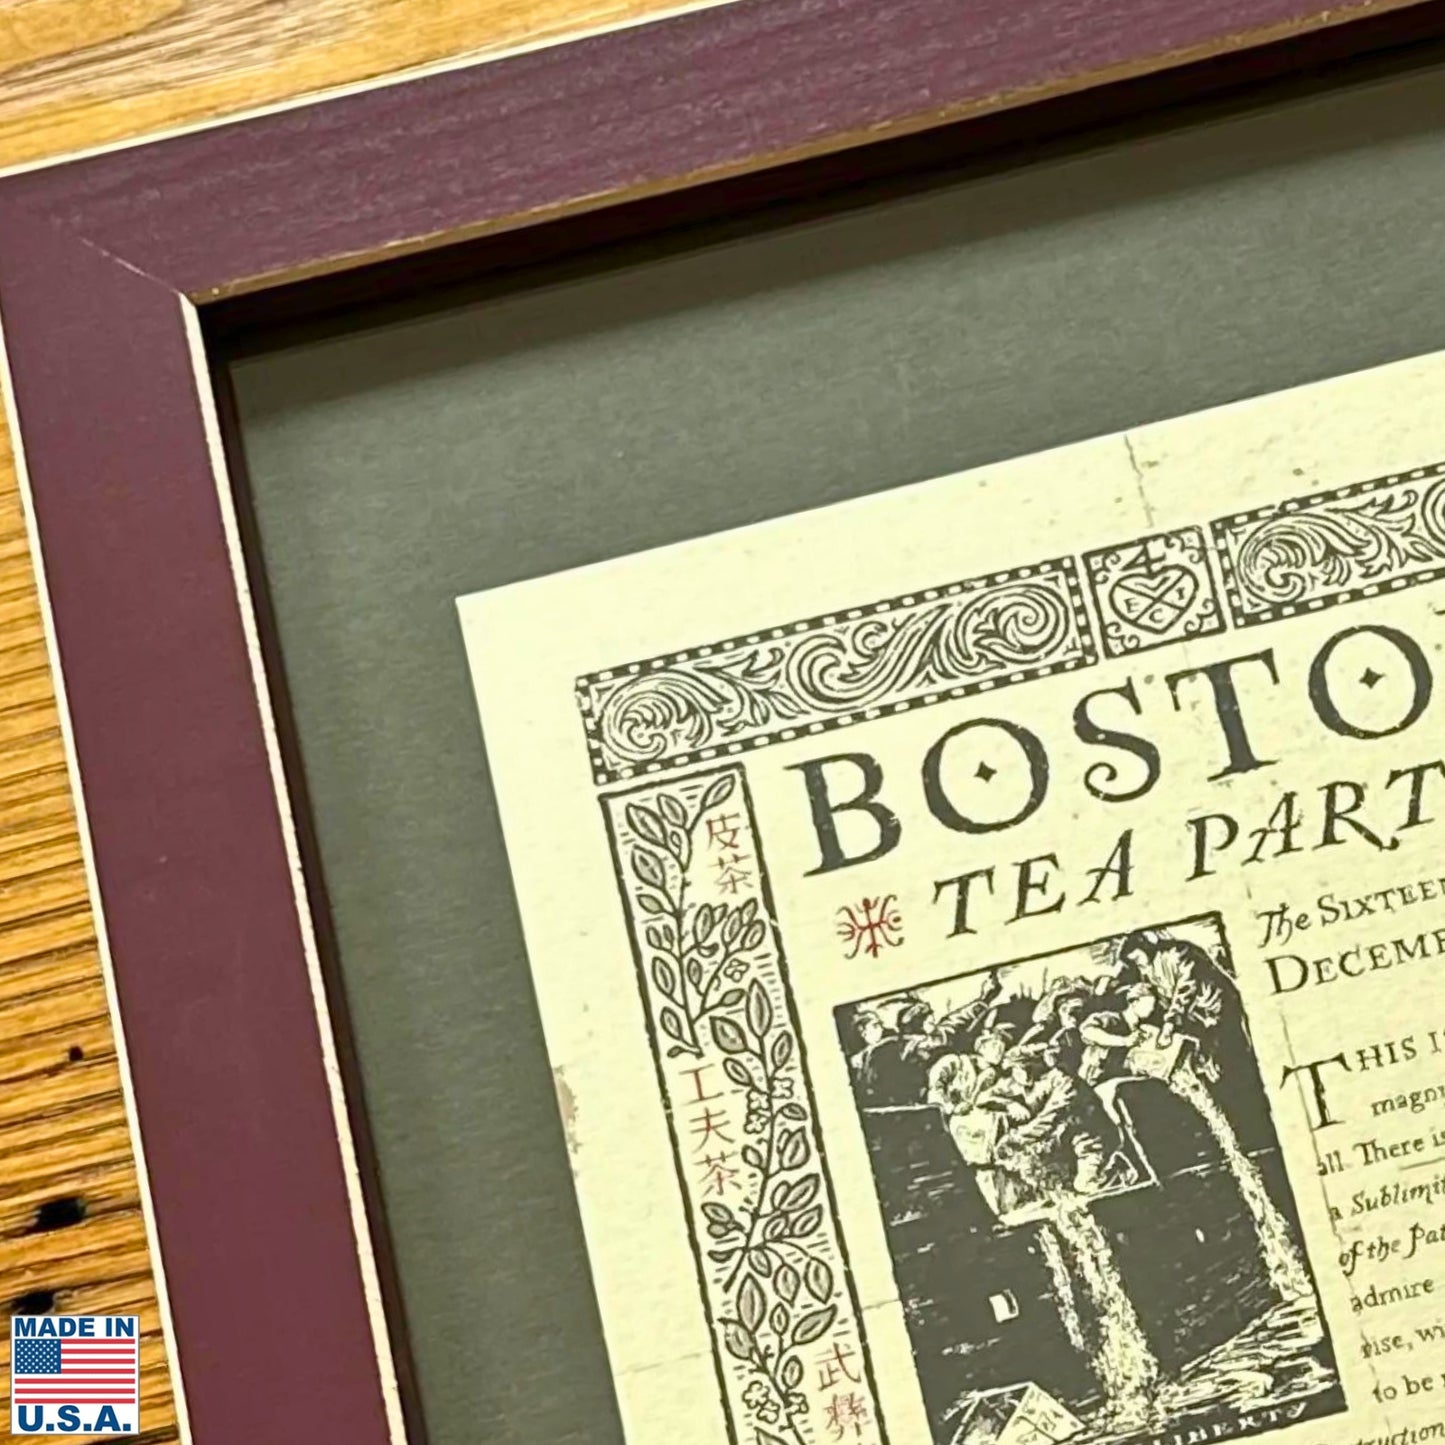 Boston Tea Party 250th Anniversary Limited edition framed print